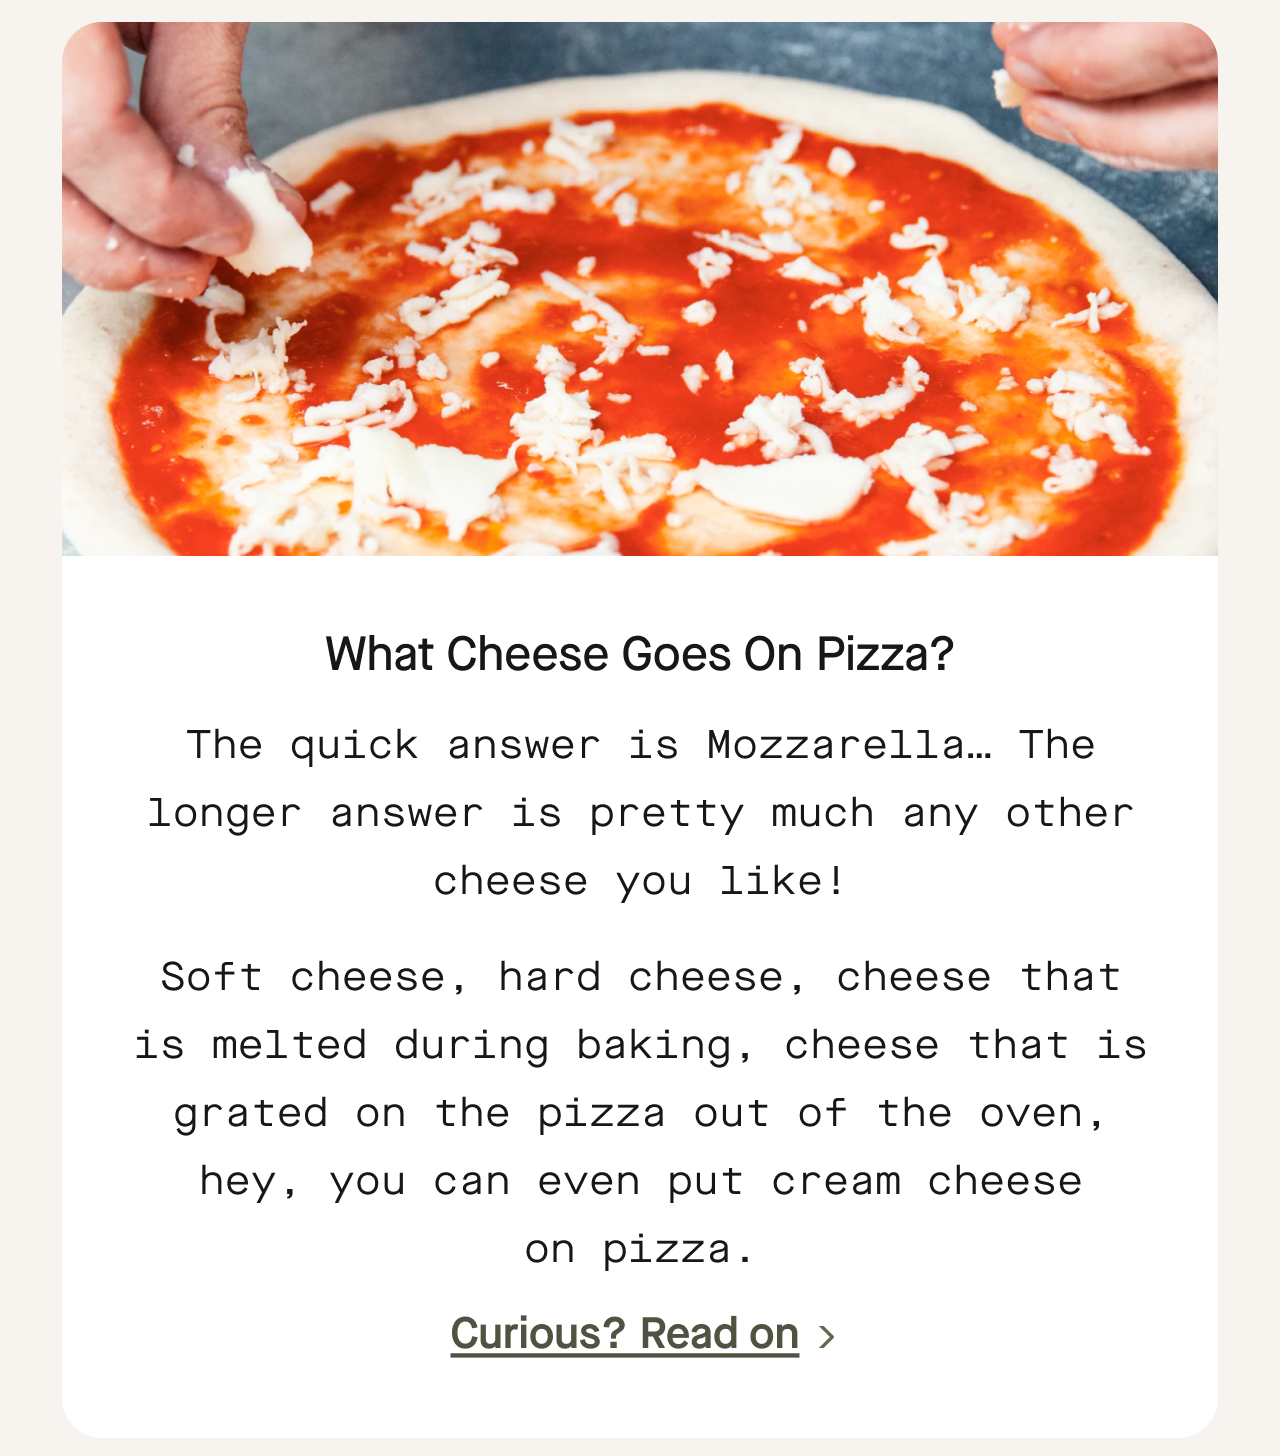 What cheese goes on pizza?